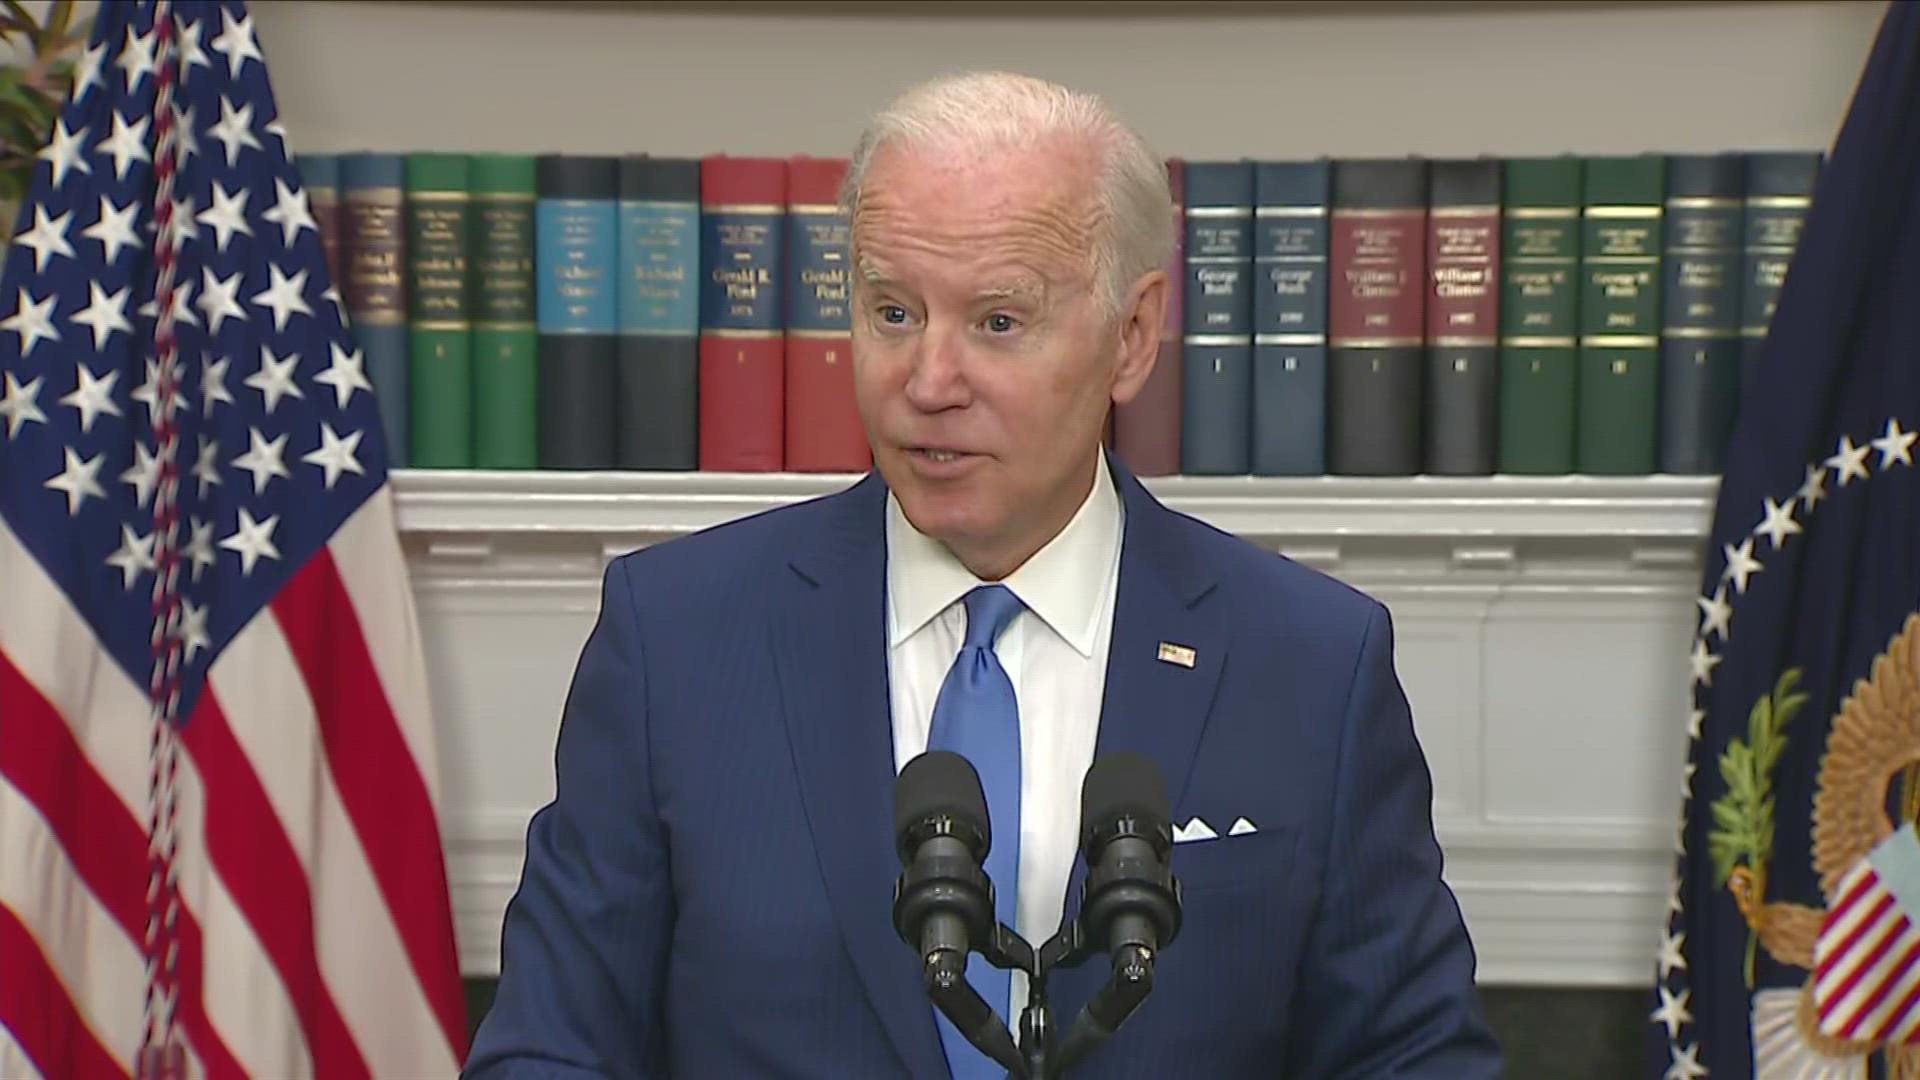 Biden said the $50,000 amount previously reported wasn't accurate, but said he was looking at debt forgiveness action for student loan borrowers.